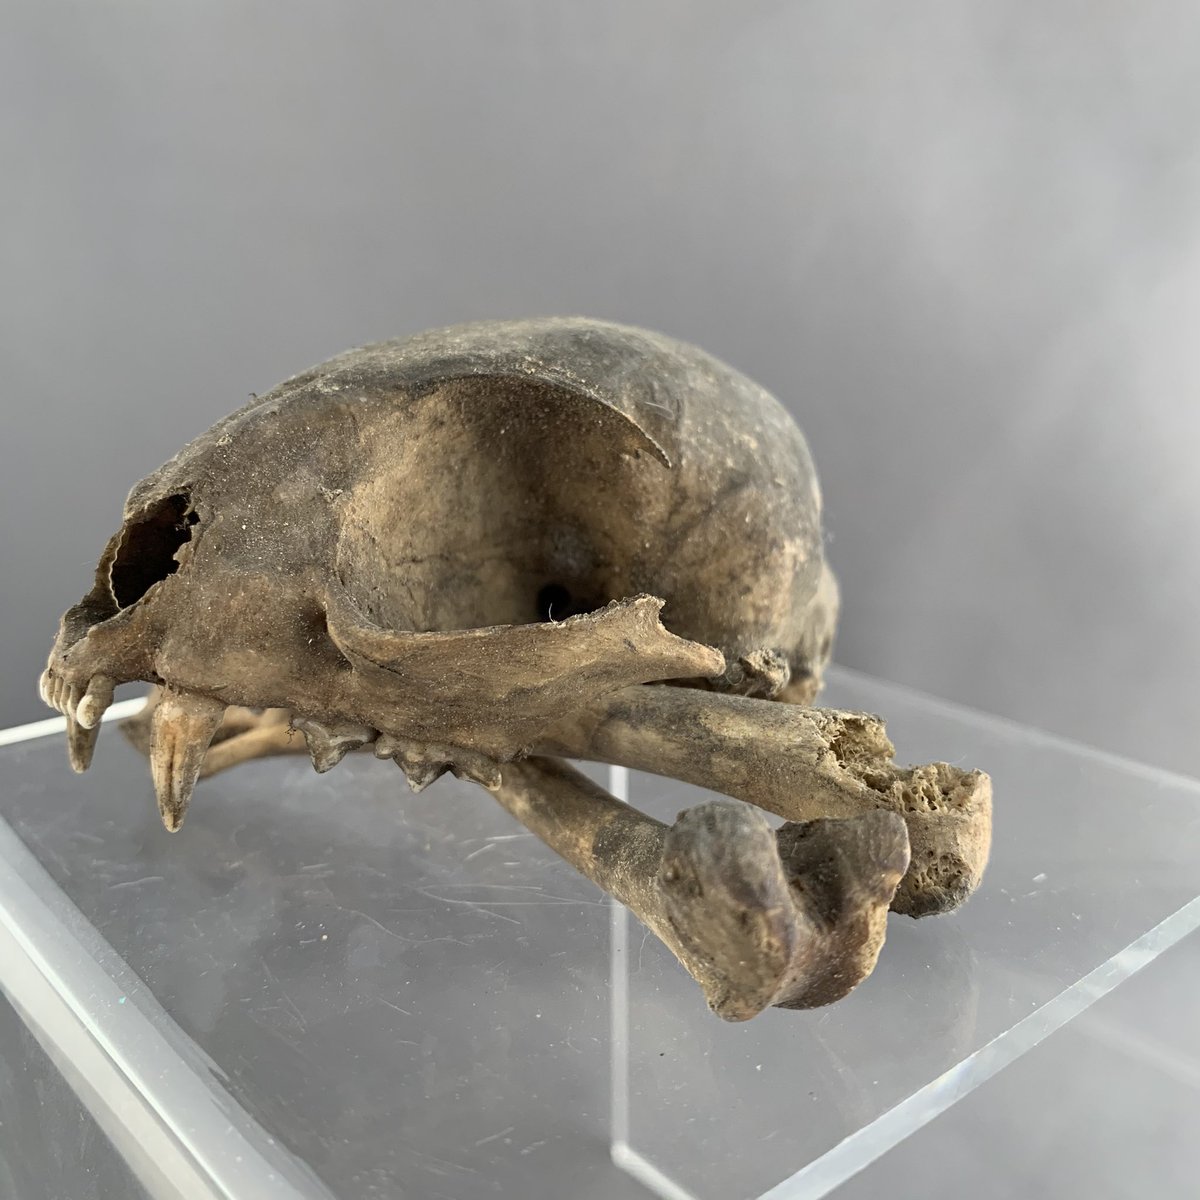 Things have taken a morbid turn (apologies) The remains of a squirrel Was it found in someone’s garden or ‘unearthed’ whilst rummaging through our collection?